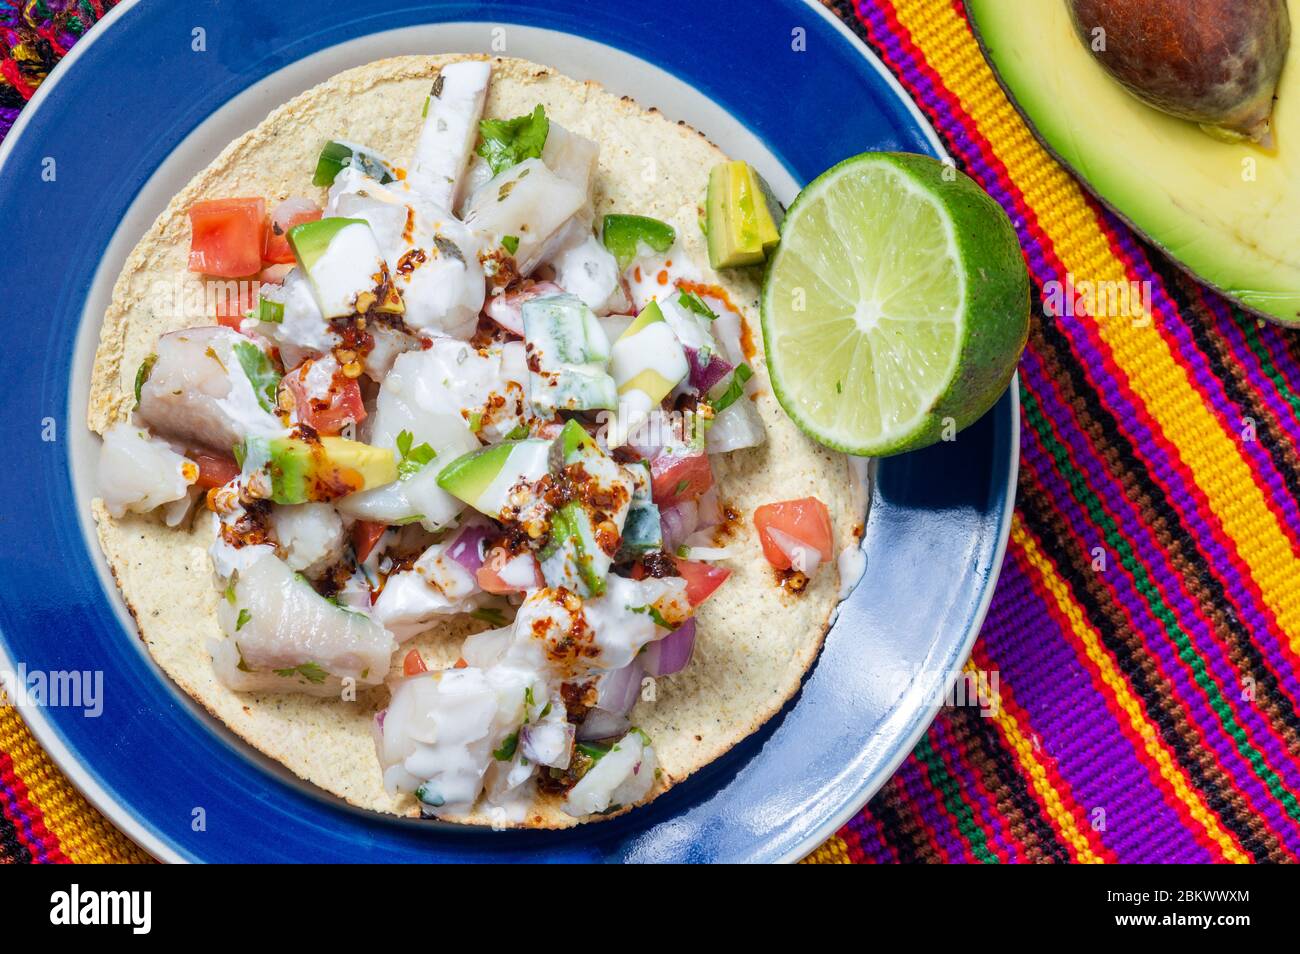 Mexican fish ceviche with crispy fried tortillas Stock Photo